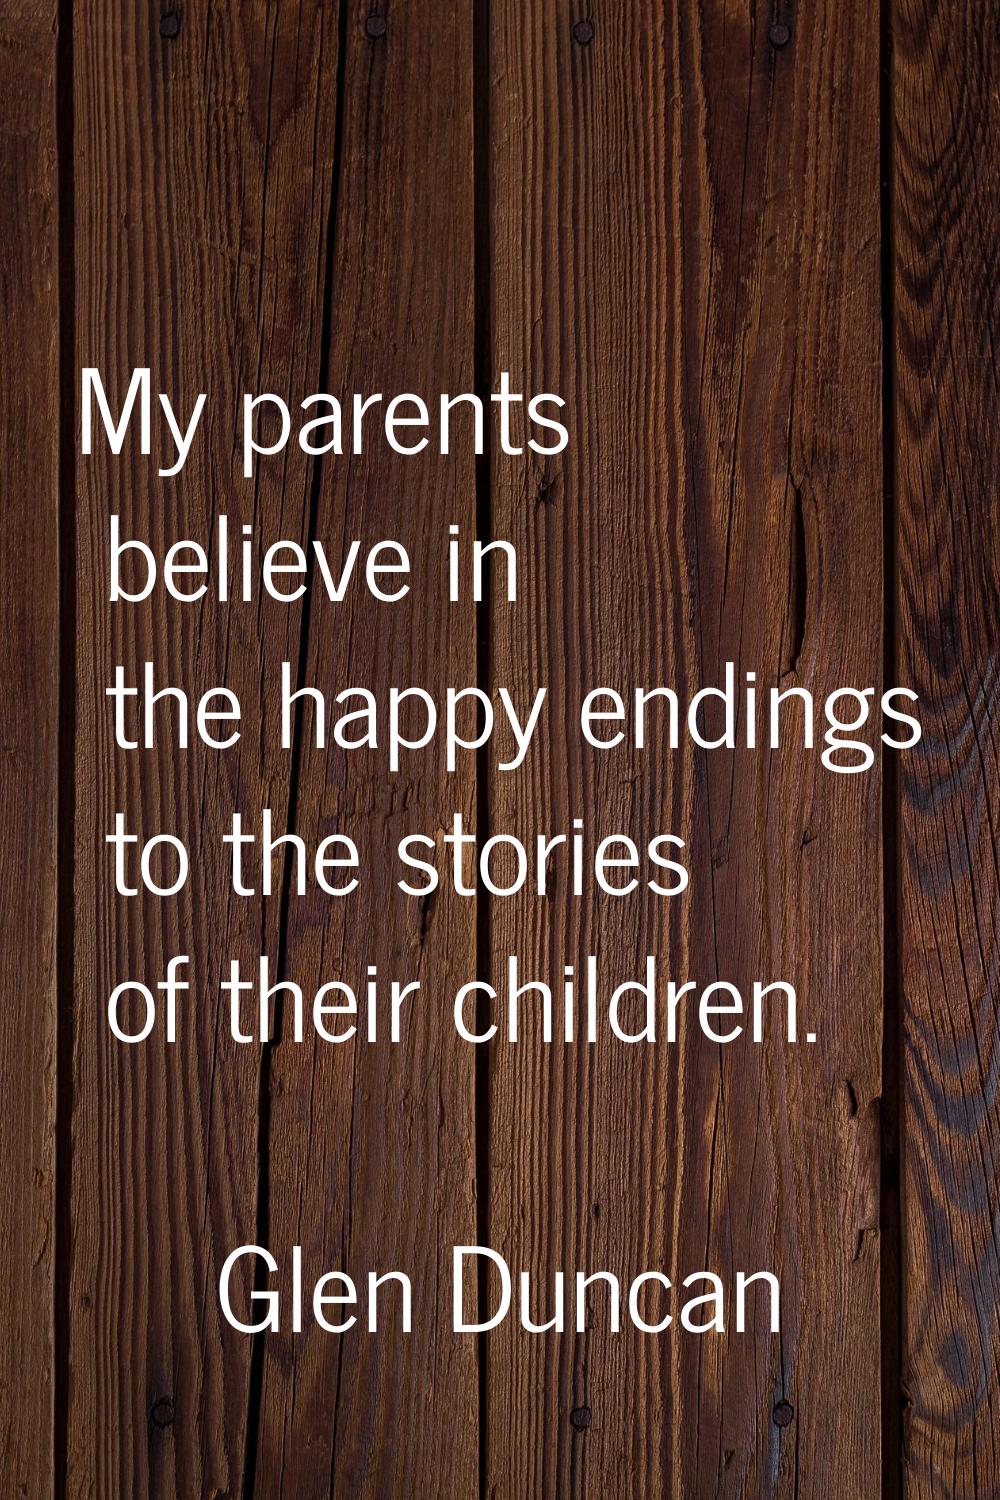 My parents believe in the happy endings to the stories of their children.